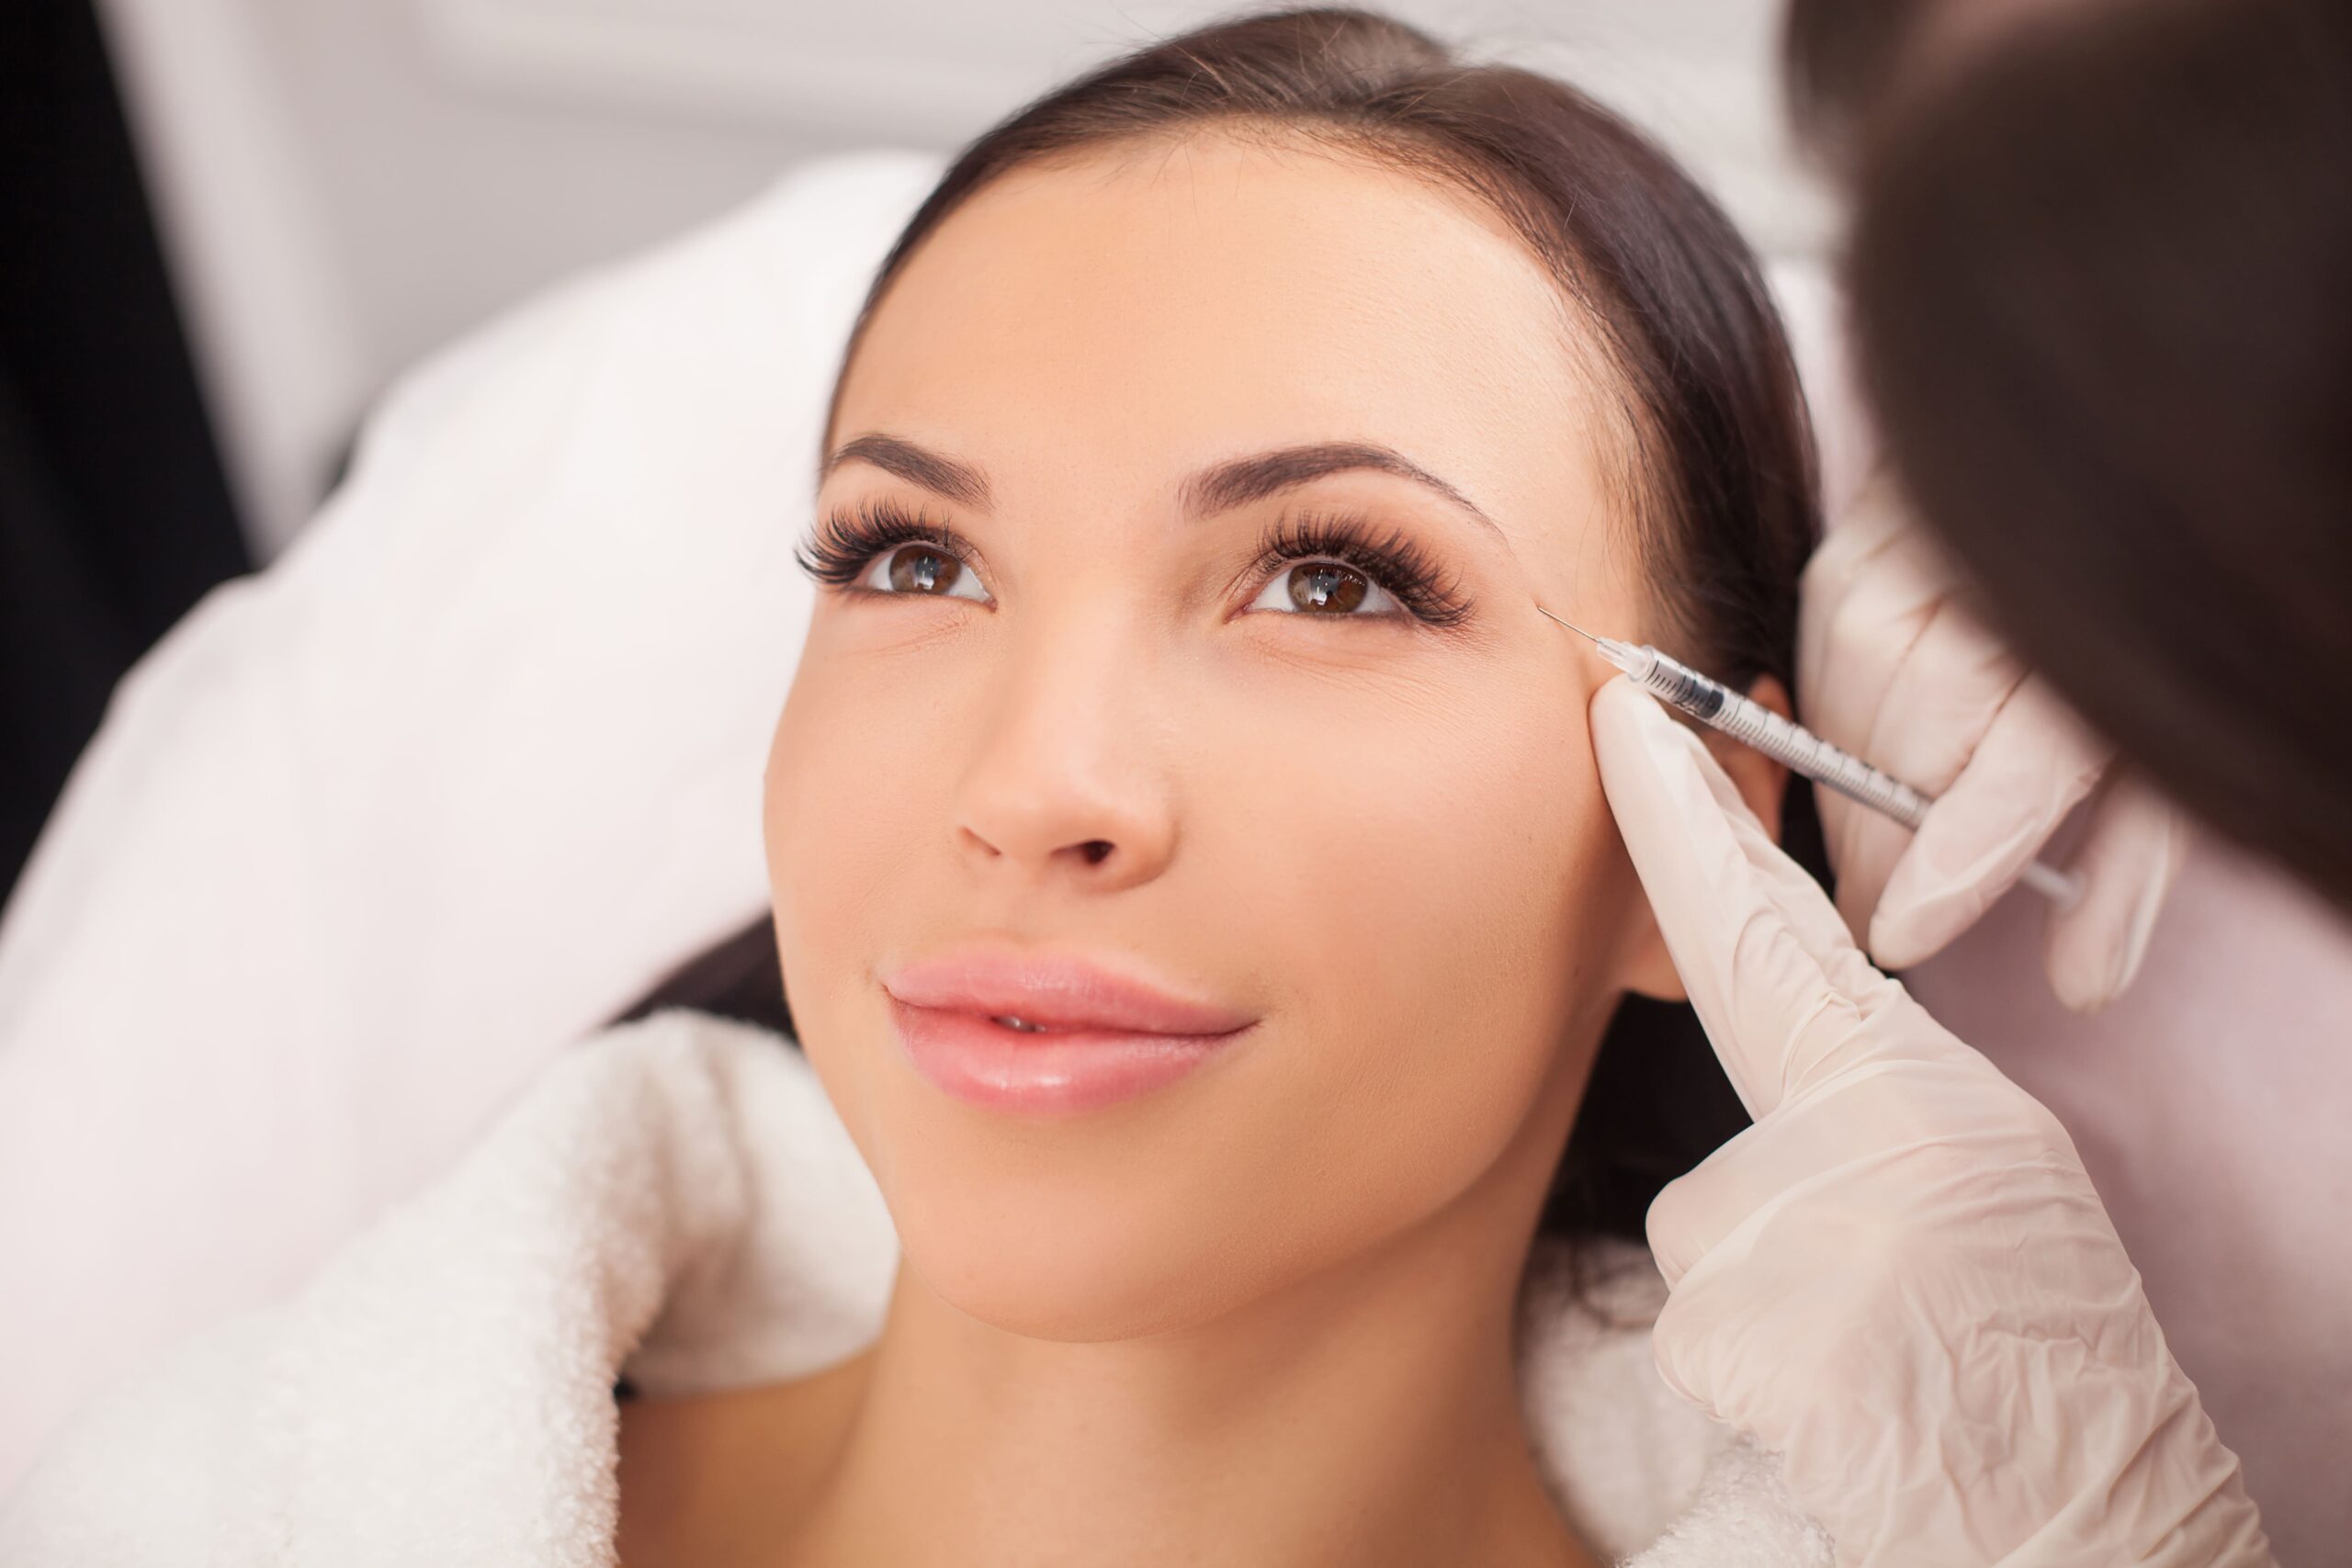 Which Should You Choose Between Botox and Fillers